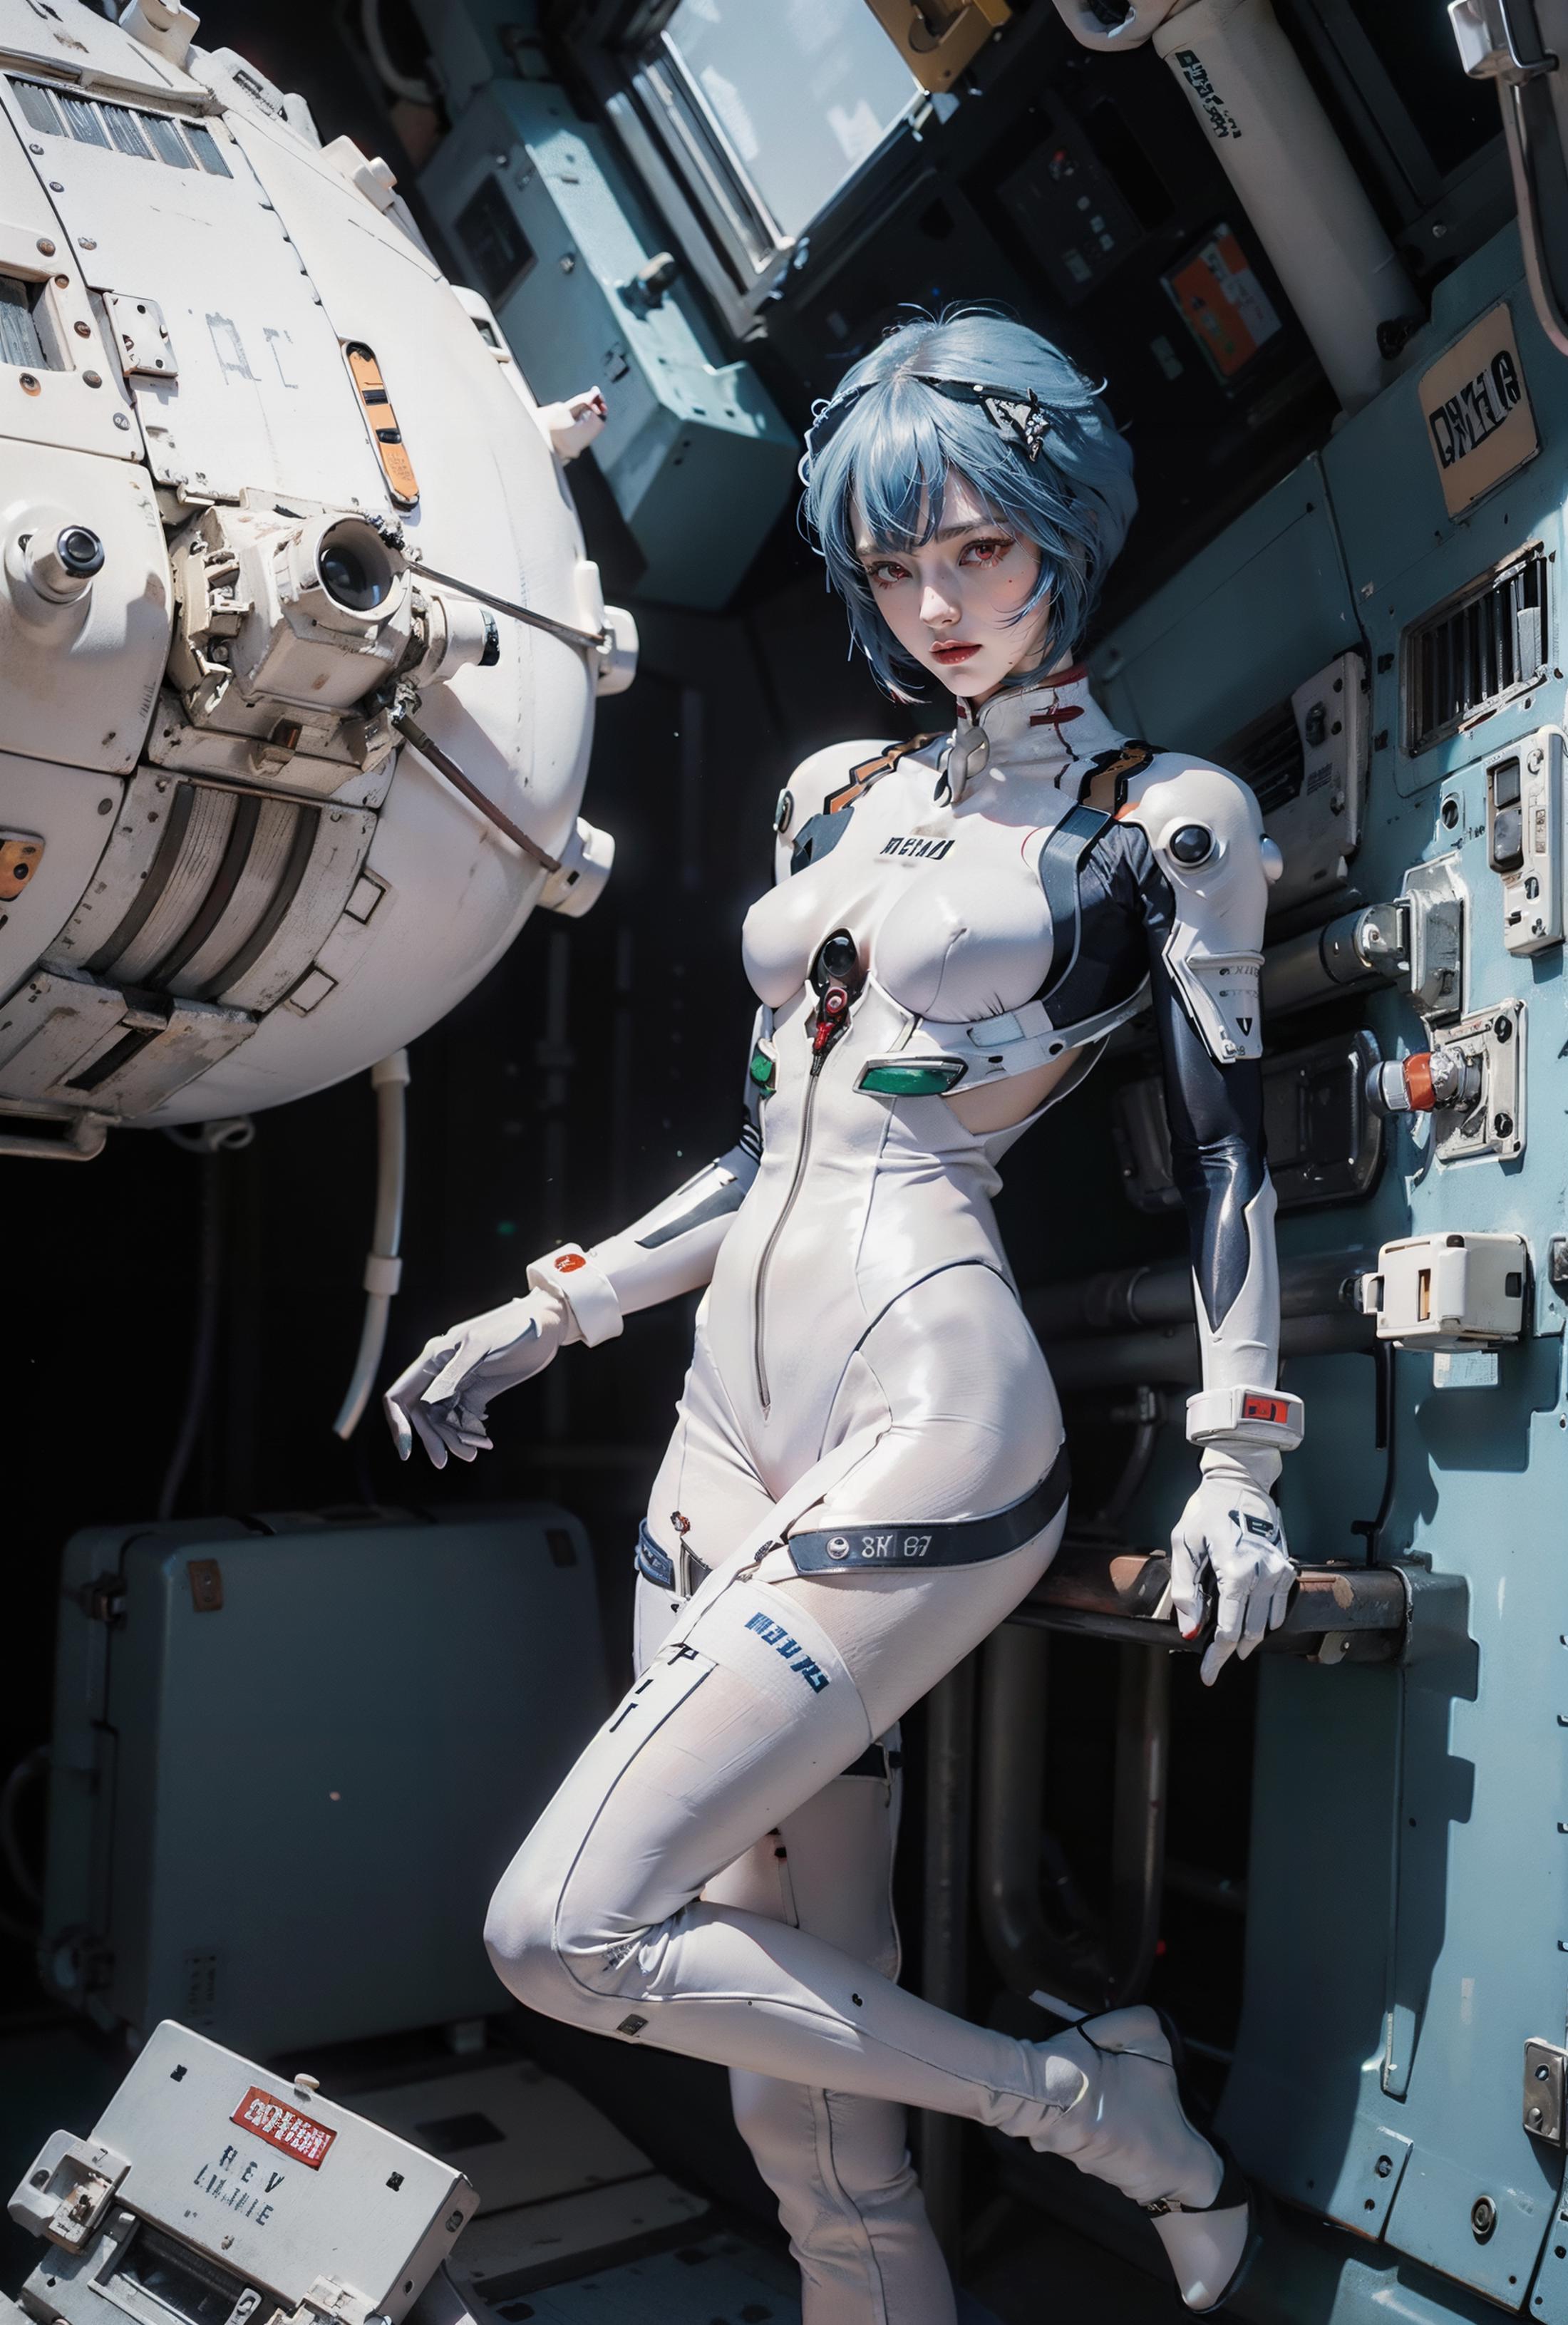 Rei Ayanami (Evangelion) LoRA image by nickychung64